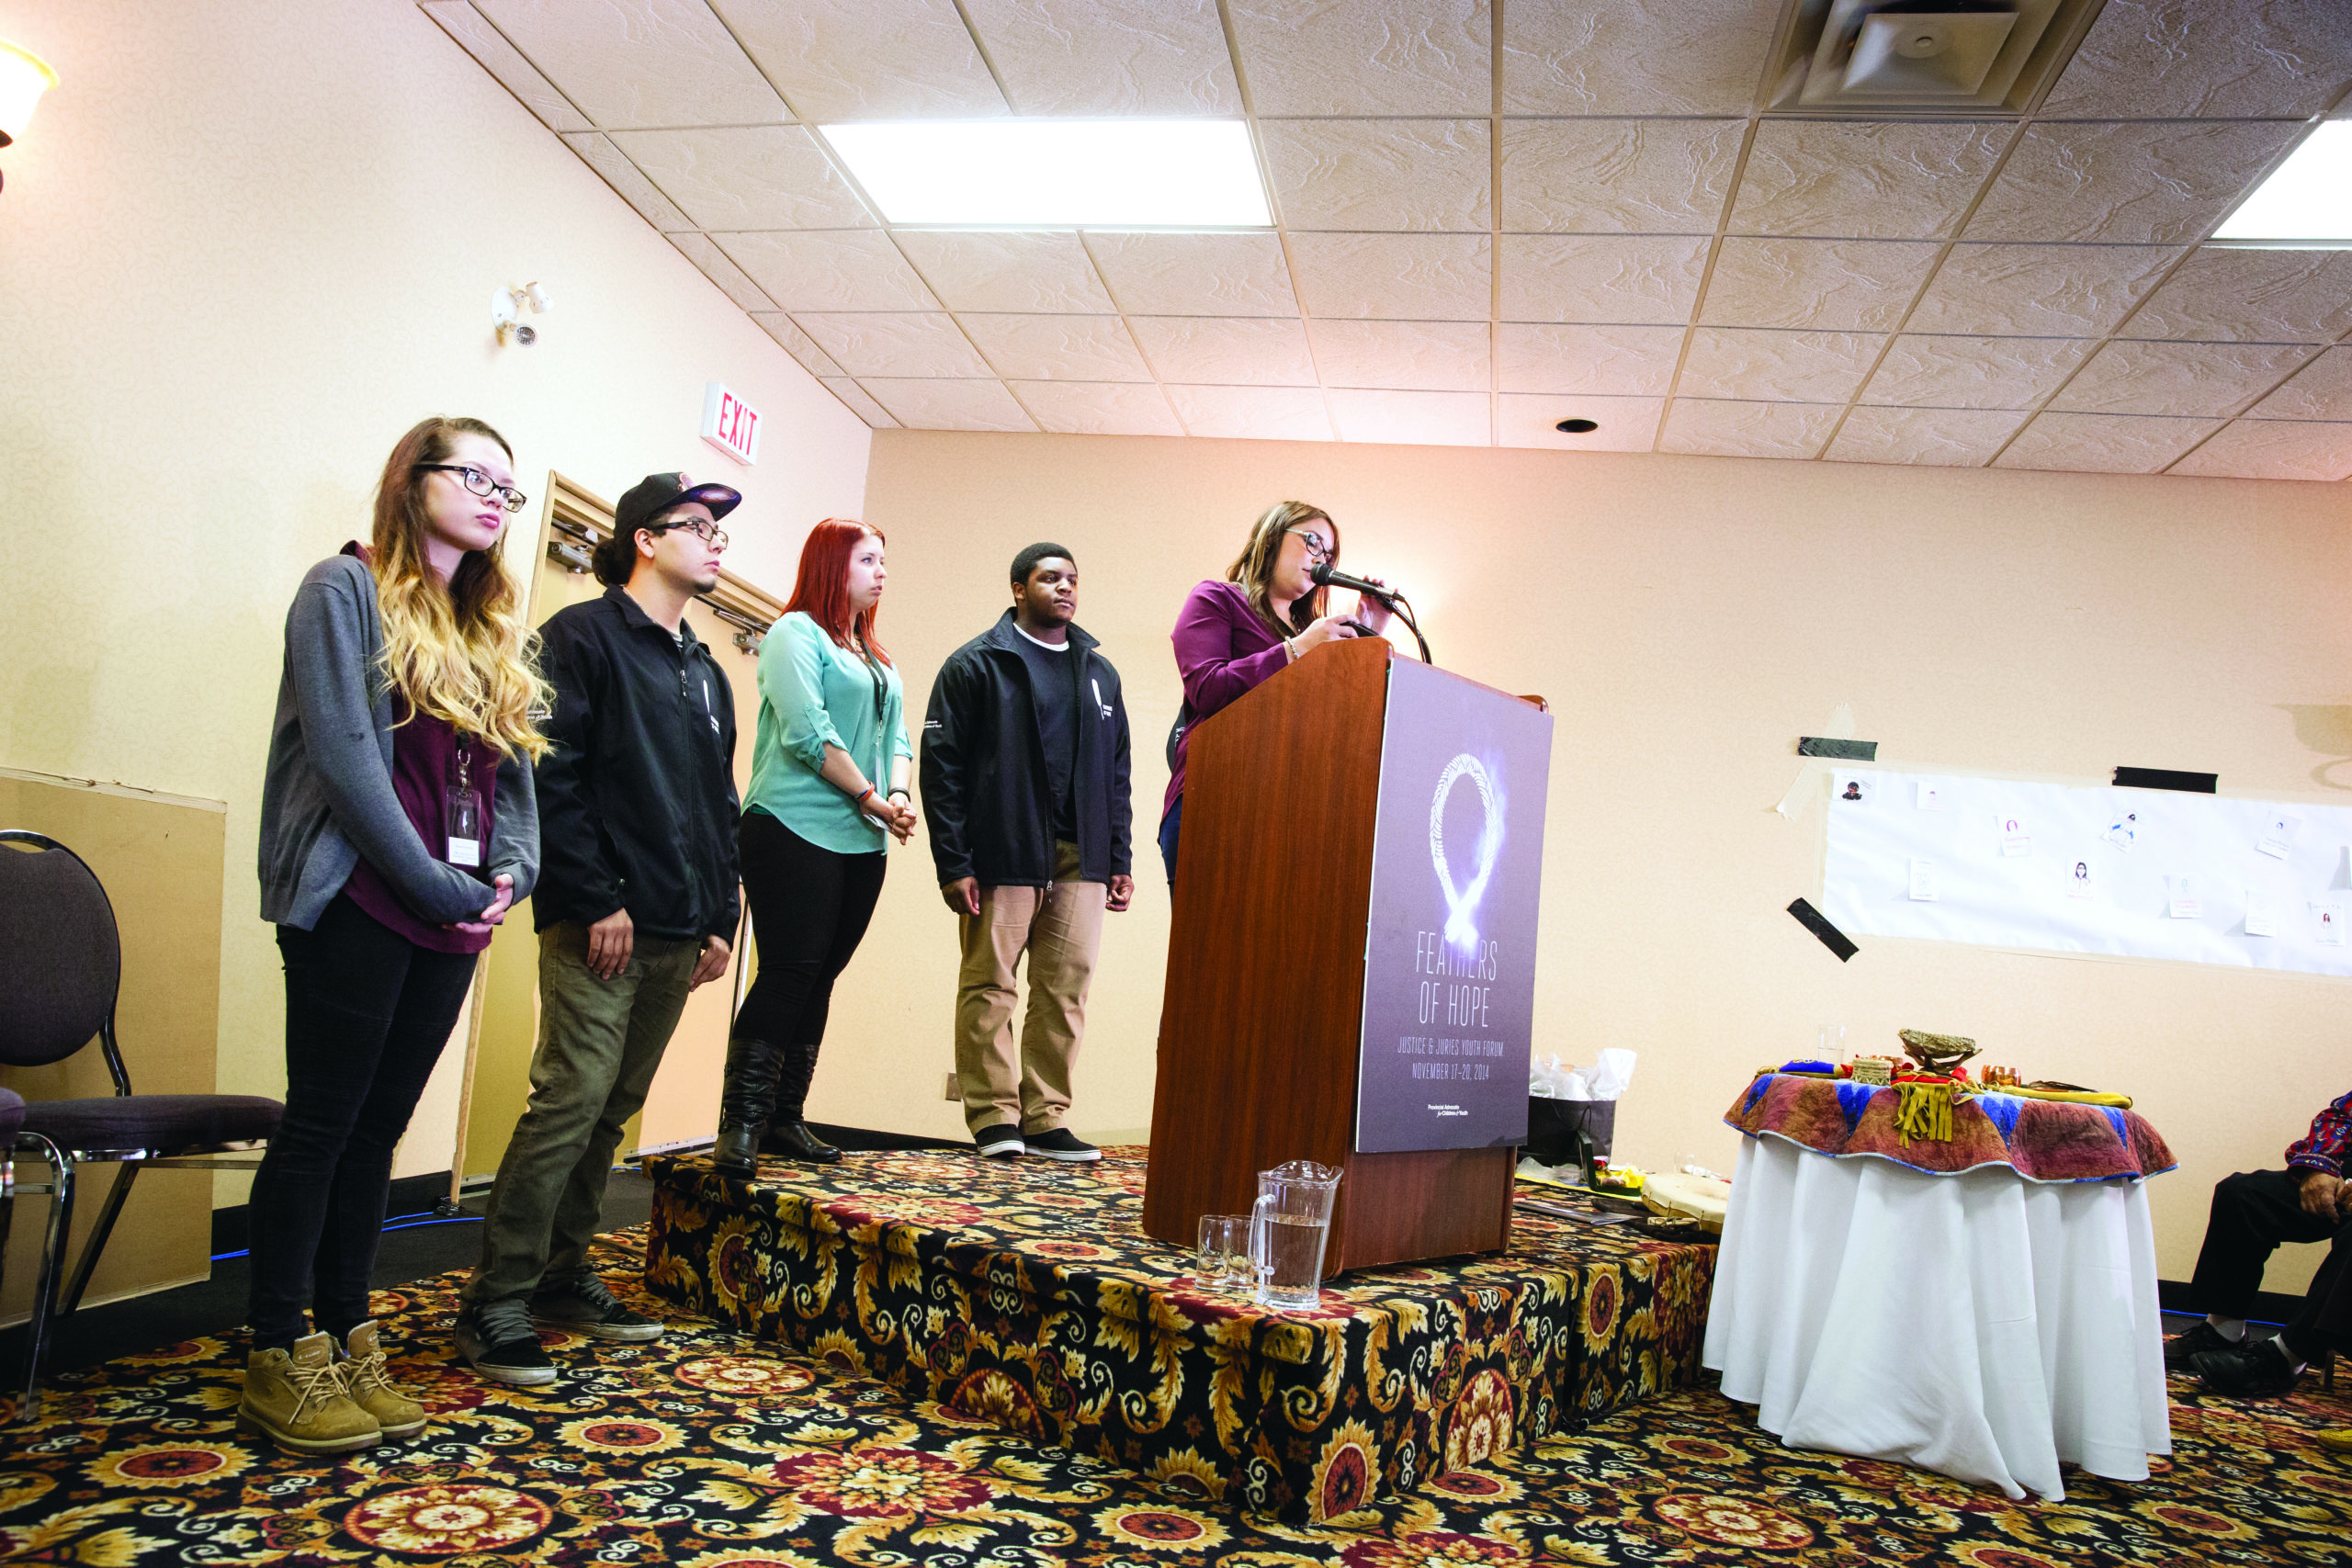 Four Youth Amplifiers and one Youth Advisor who worked on the Justice and Juries report. The youth on the far right hand side is at a podium speaking into a microphone while the other four youth stand behind the podium.